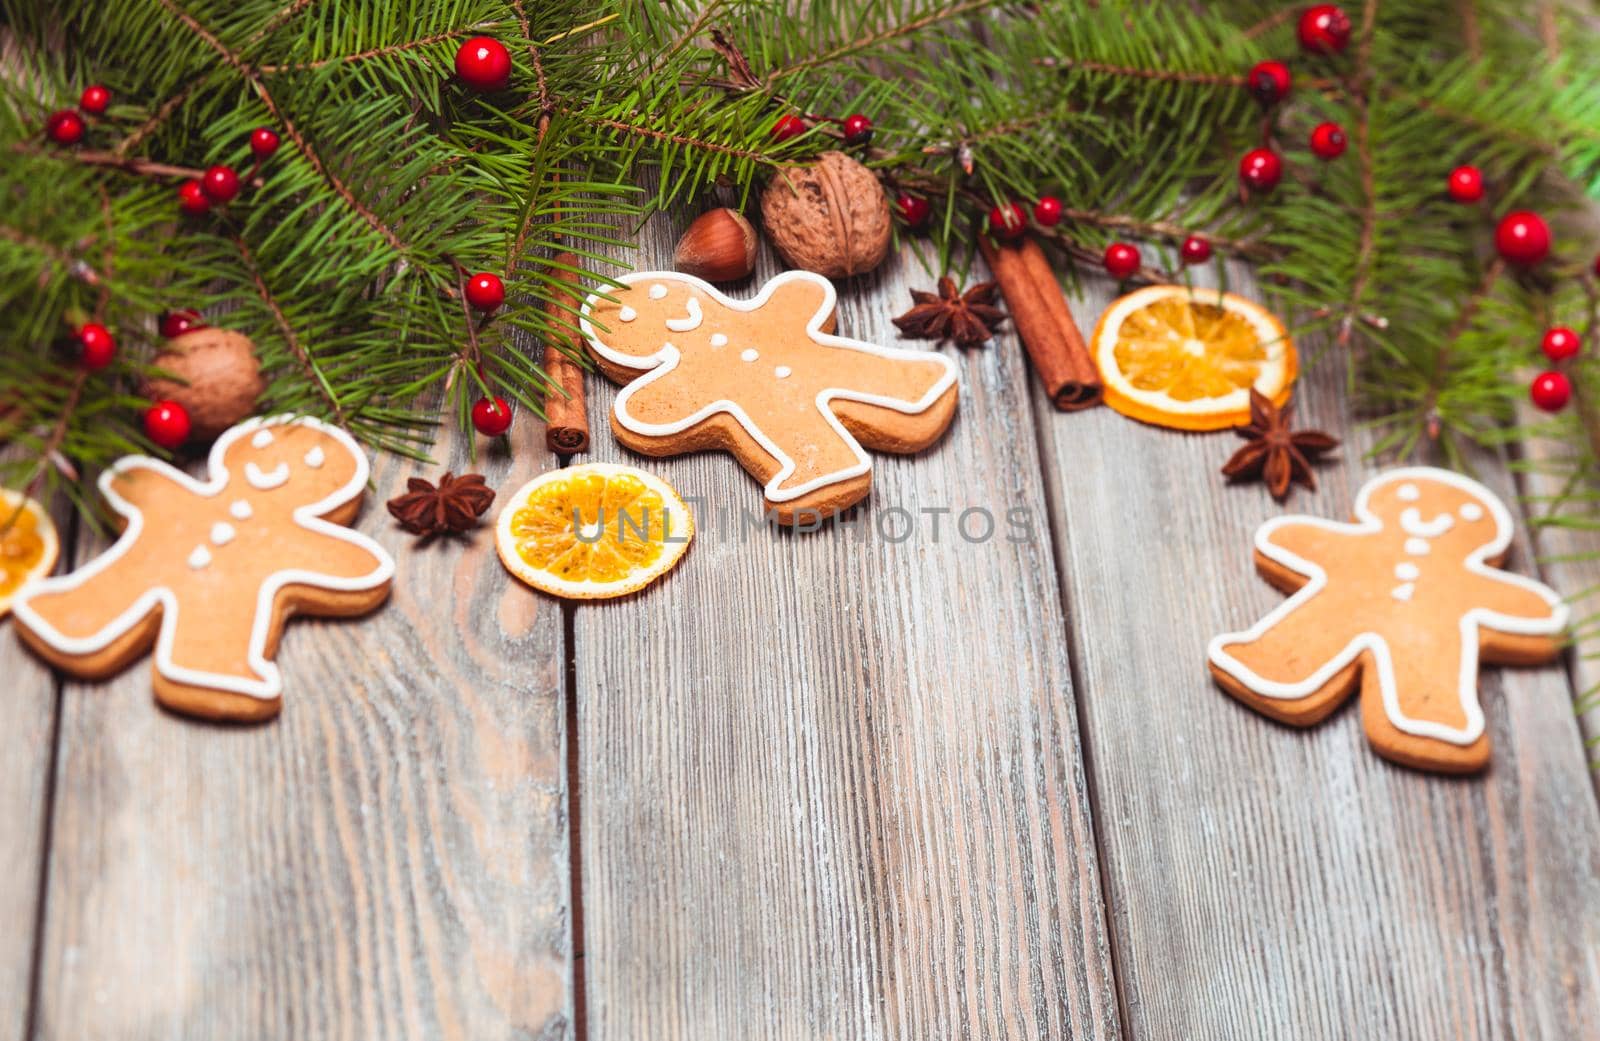 Gingerbreads and fir tree branches on the wooden table. Christmas decor